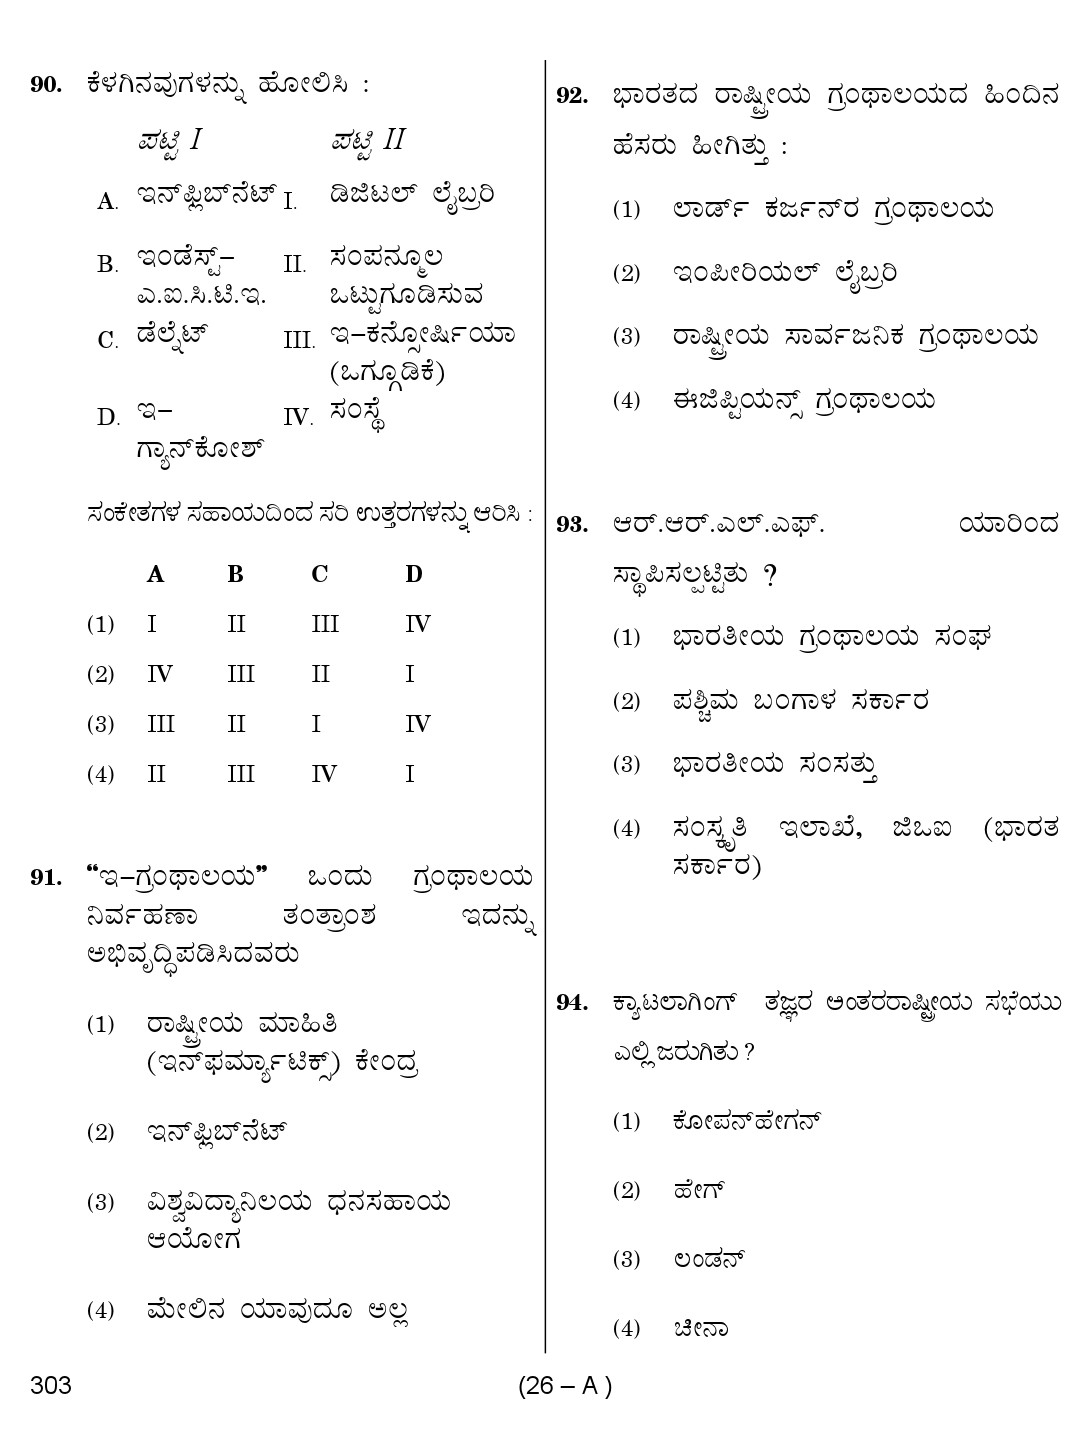 Karnataka PSC 303 Specific Paper II Librarian Exam Sample Question Paper 26